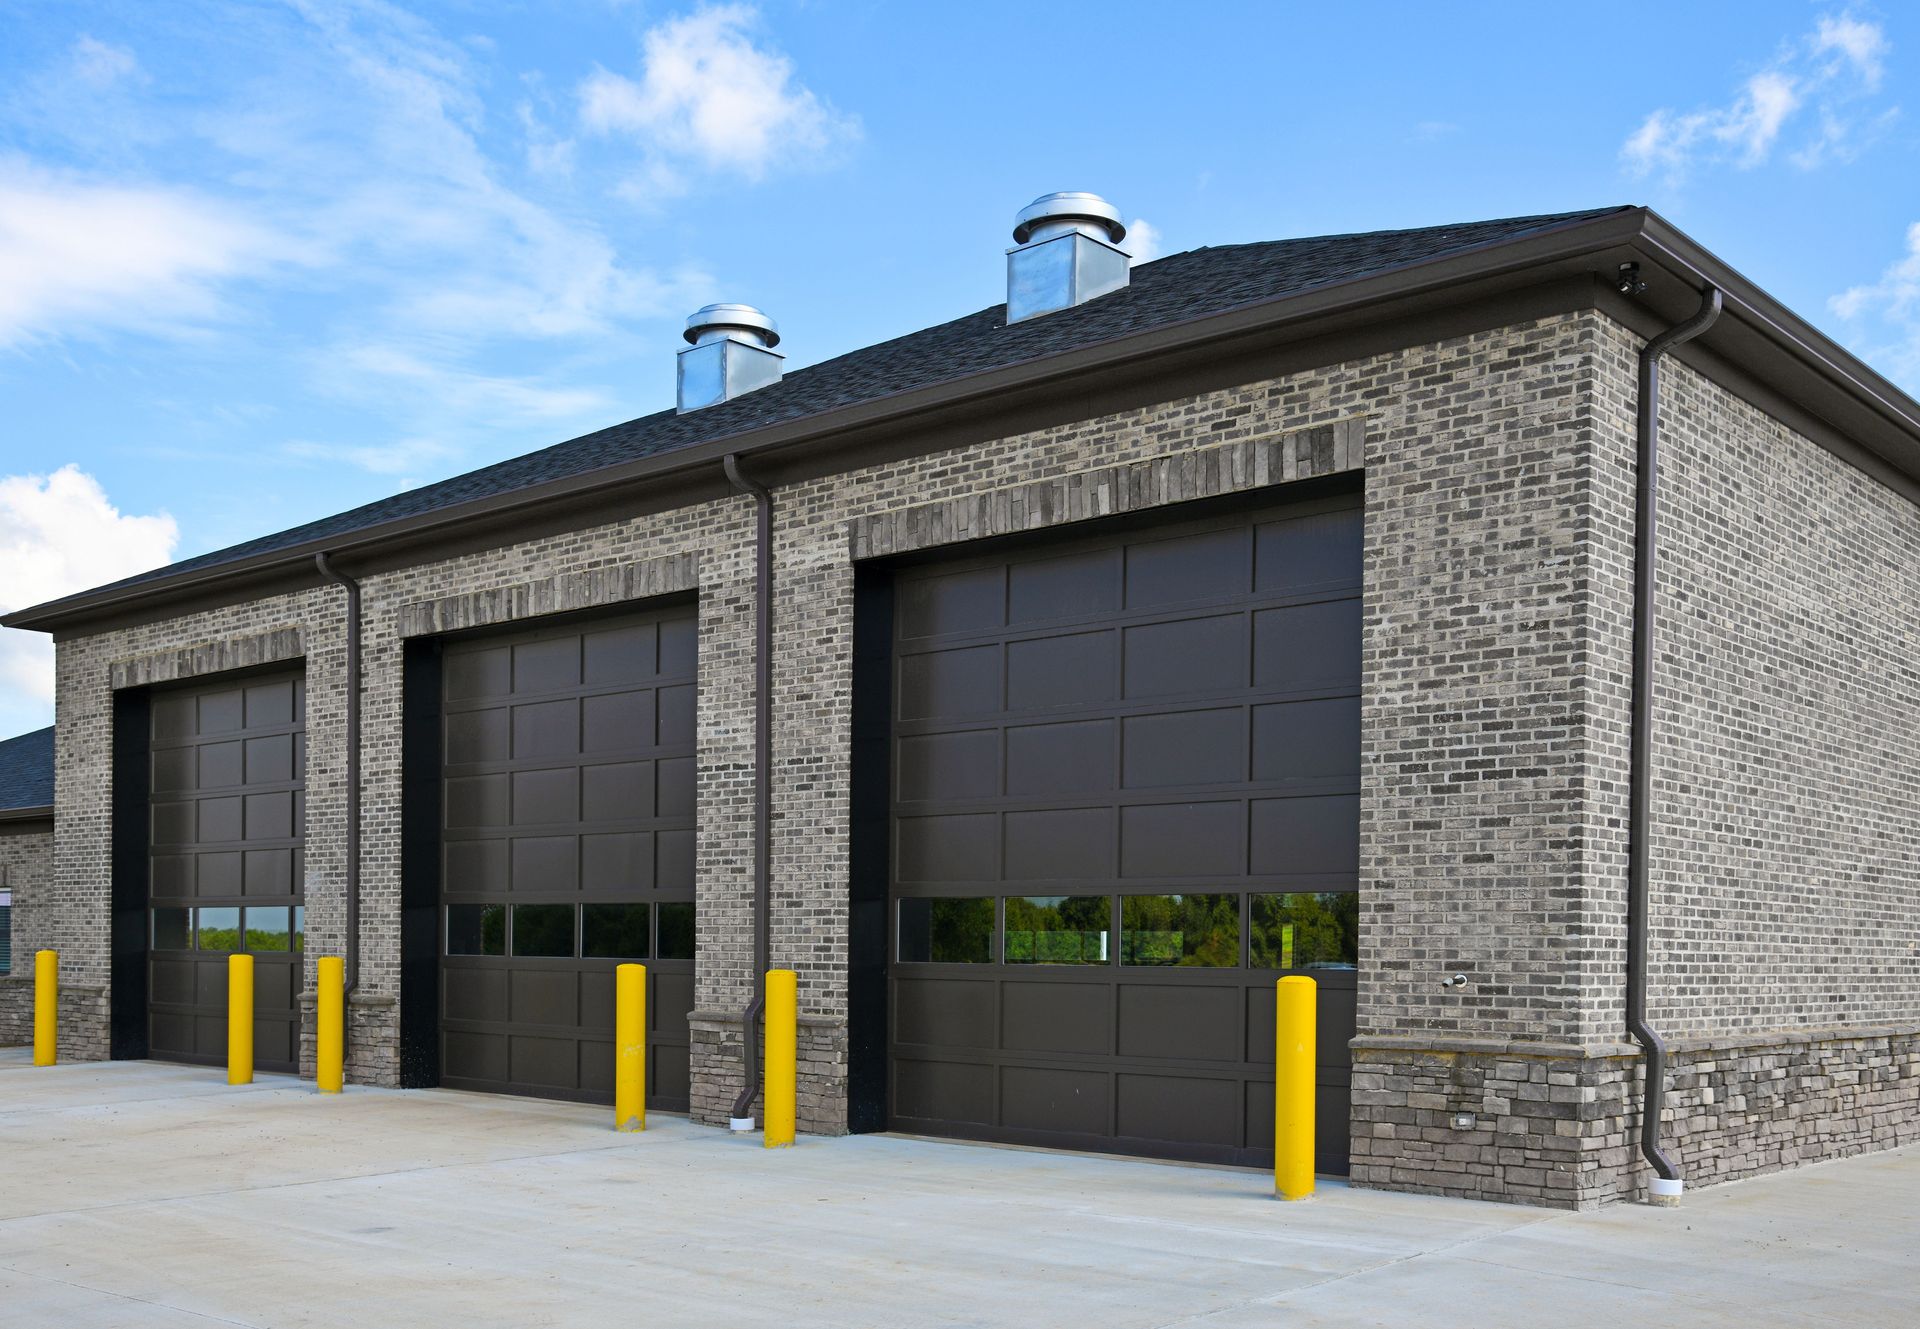 A row of garage doors on a brick building